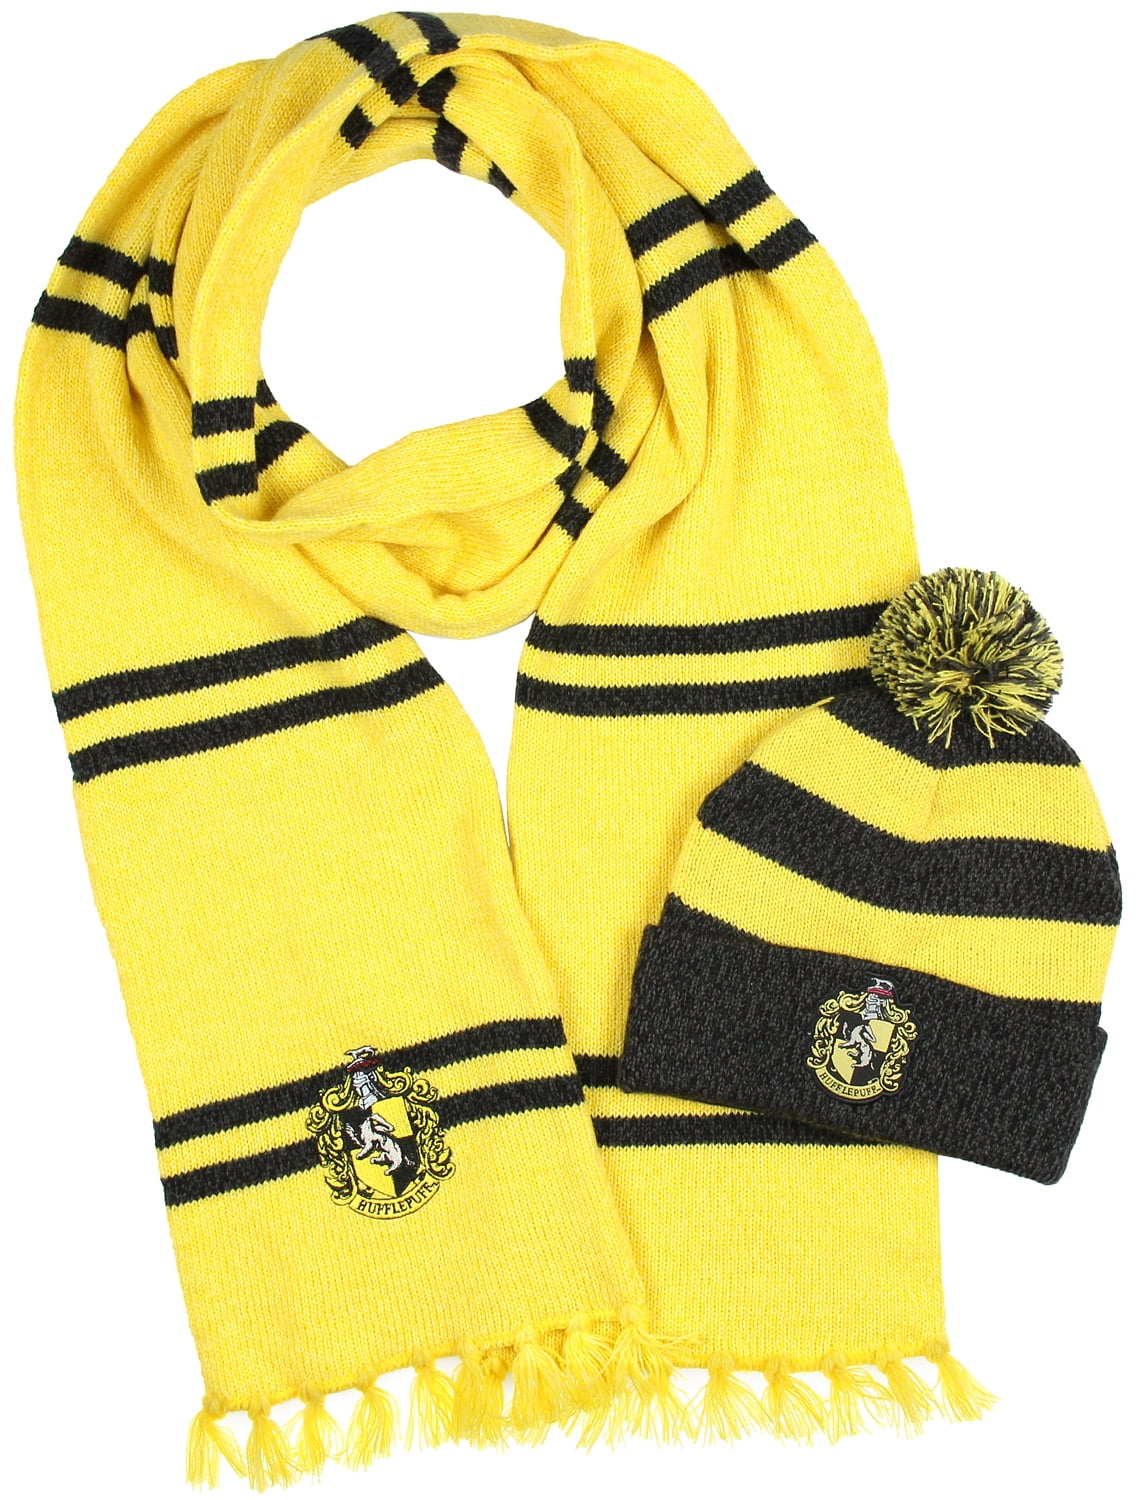 Harry Potter Vouge Hufflepuff House Cosplay Knit Costume Scarf Wrap 